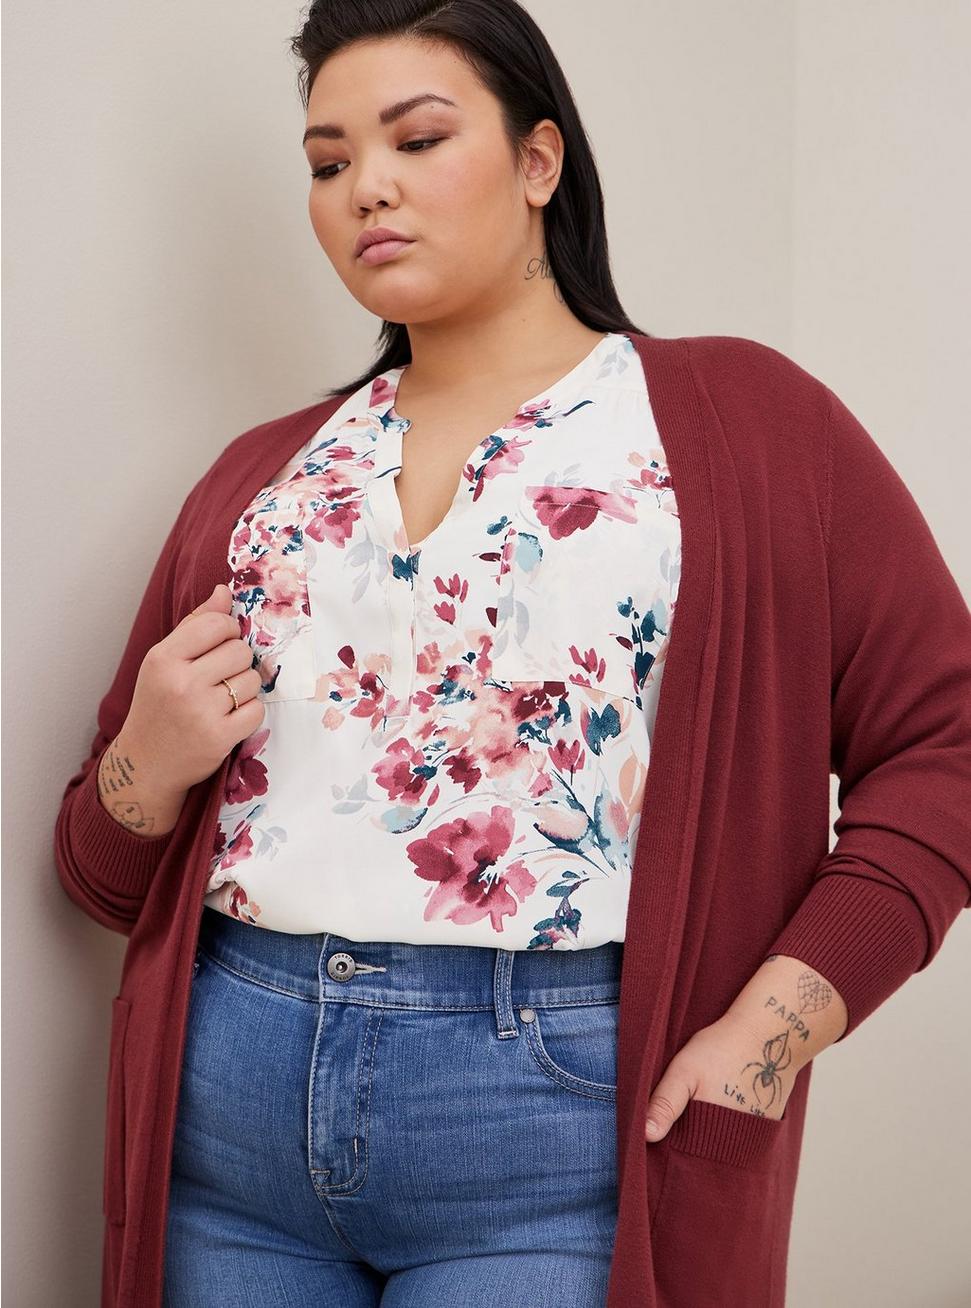 Plus Size Everyday Soft Duster Open Front Sweater, MAROON, alternate